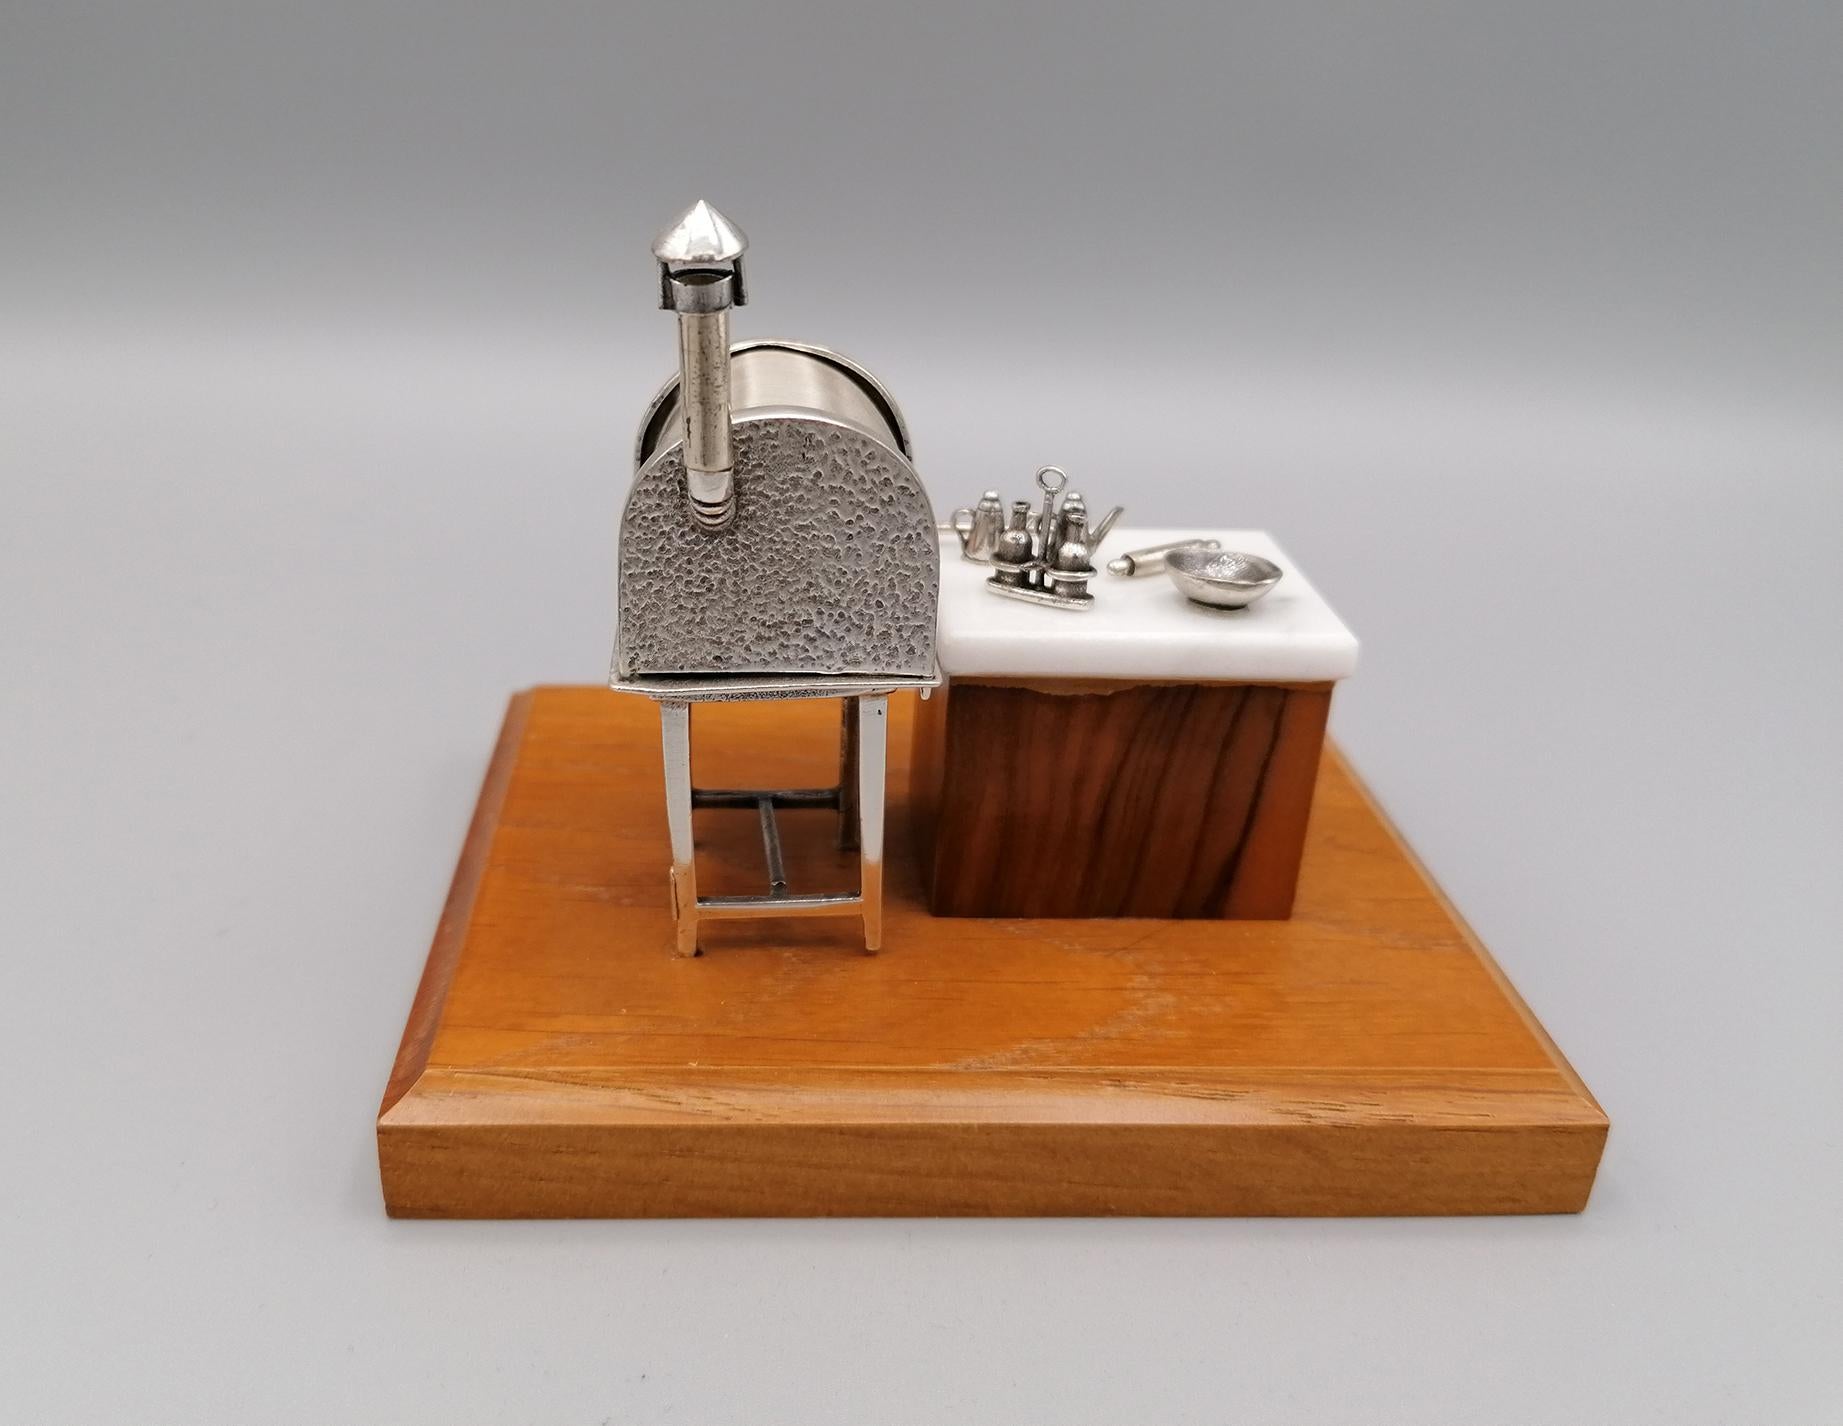 Hand-Crafted 20th Century Italian Sterling Silver Miniature Depicting a Pizza Chef's Station